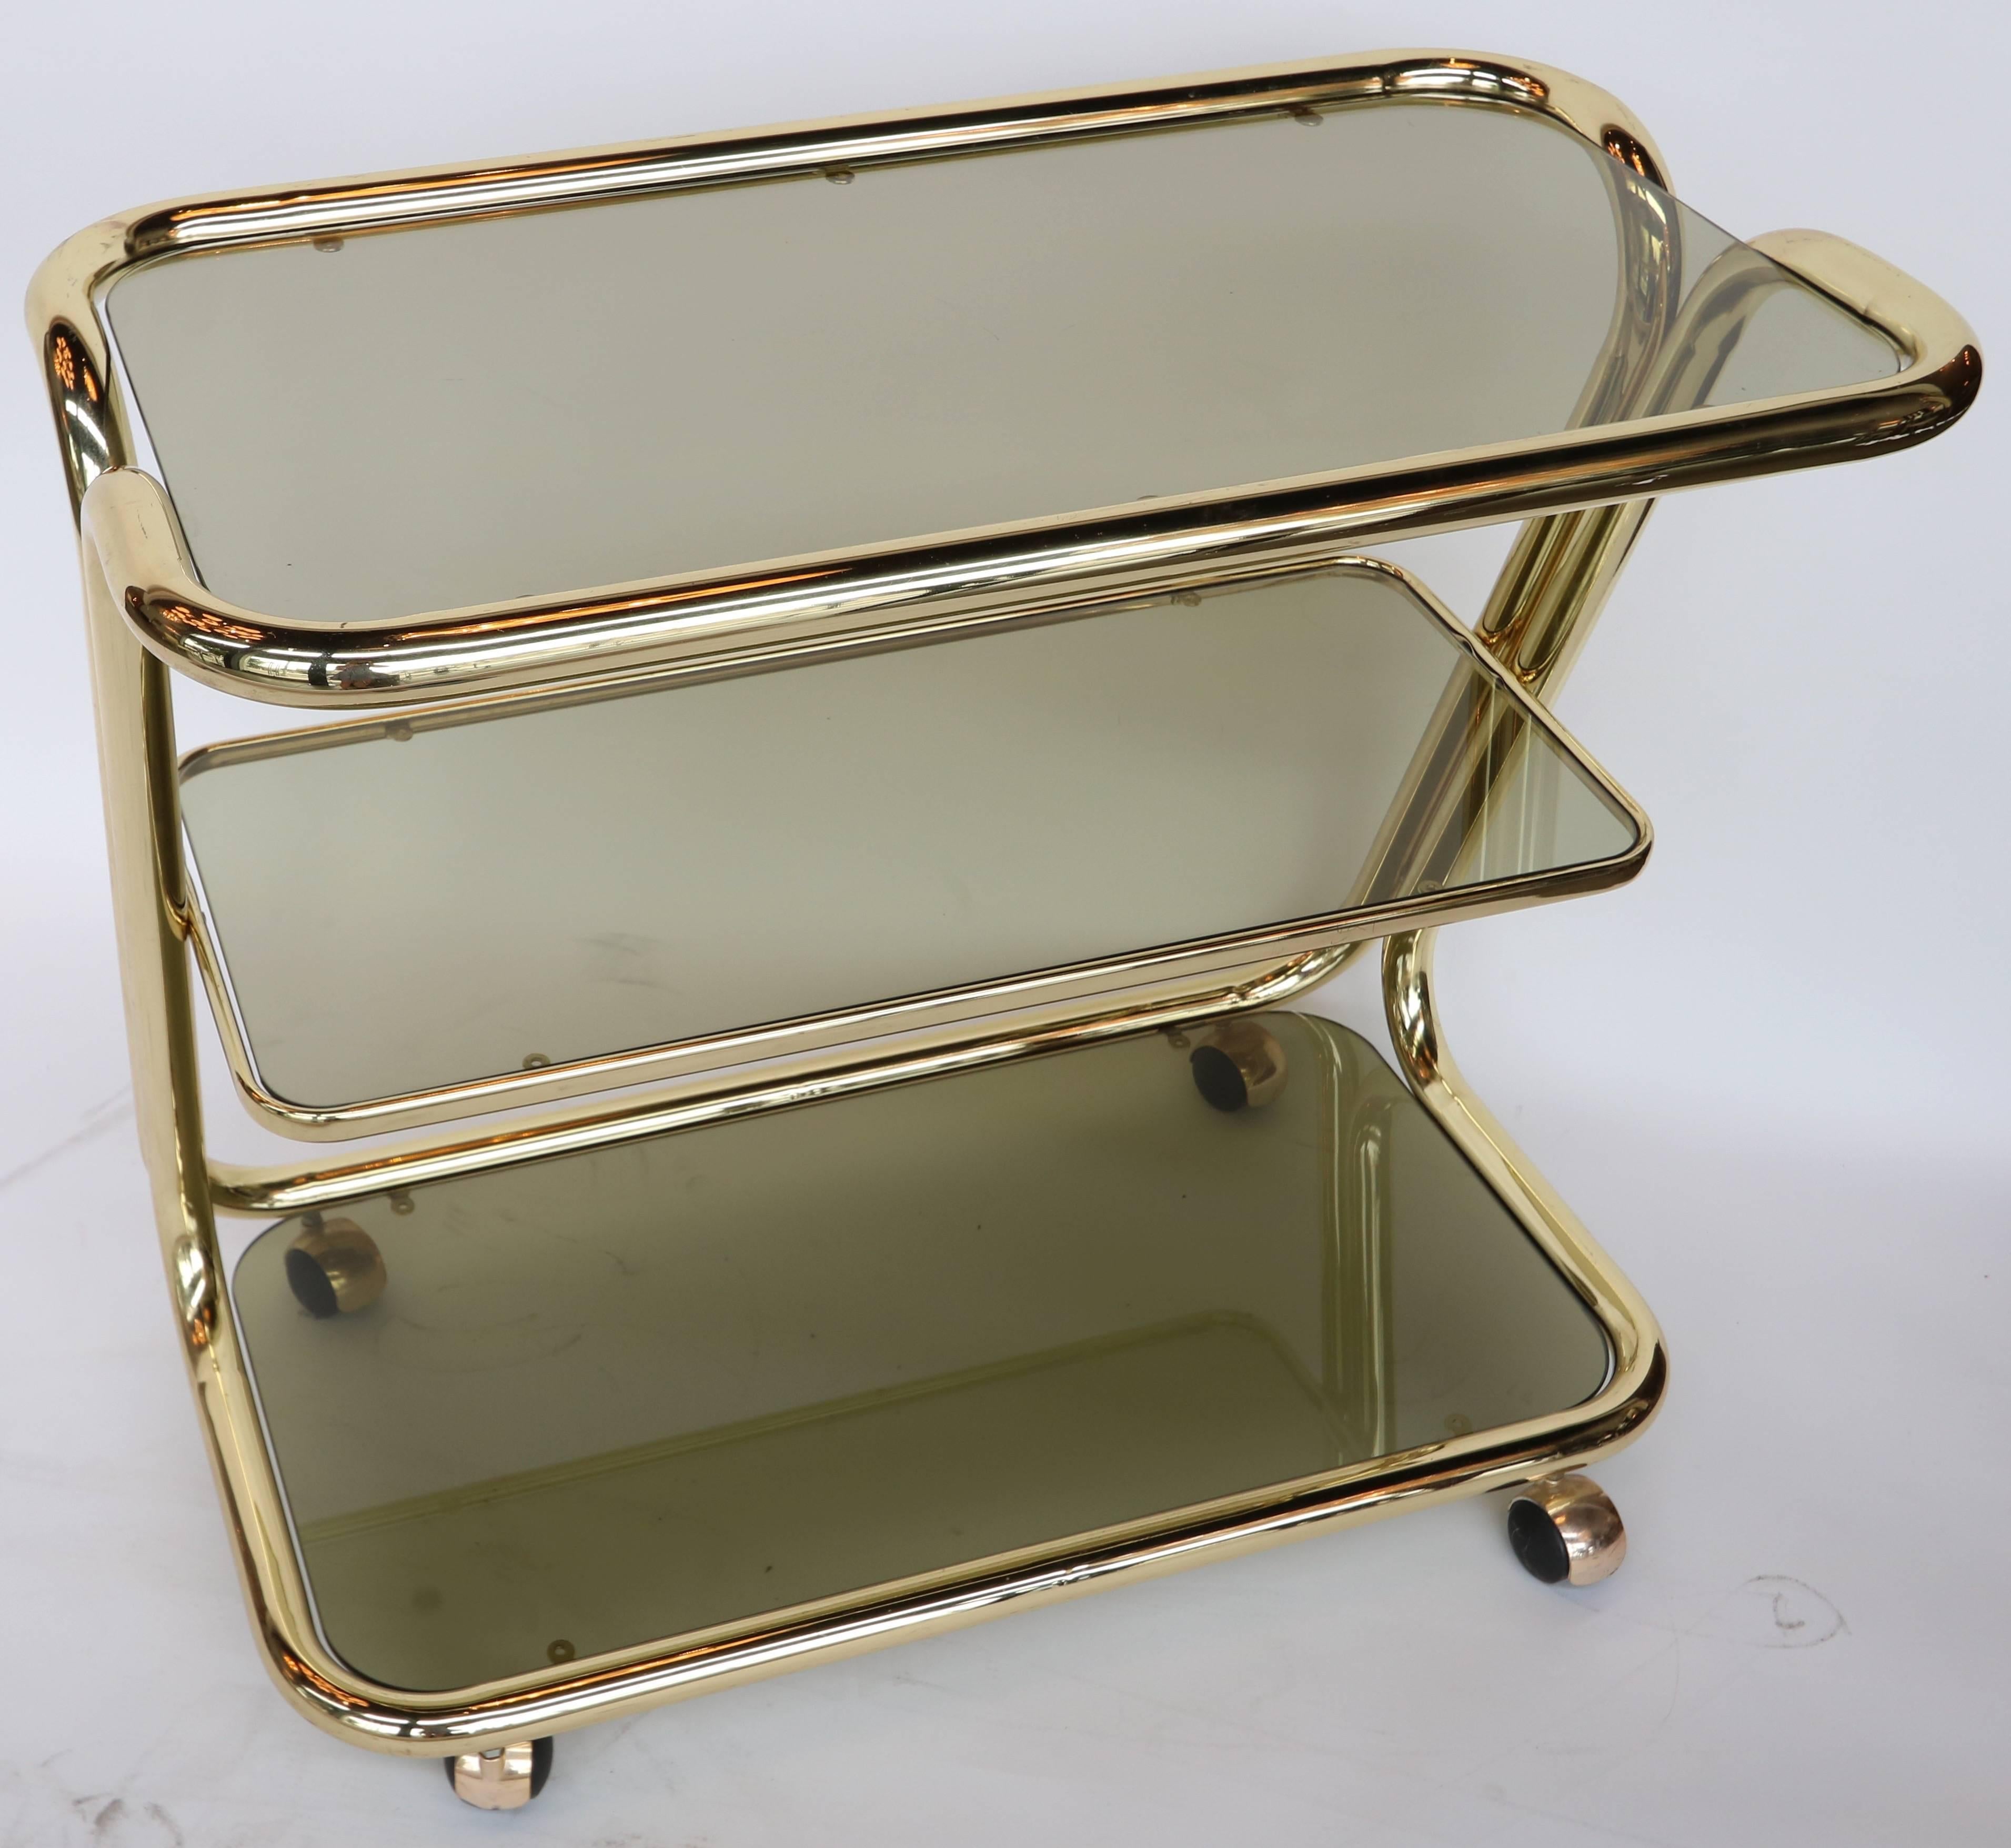 Brass bar cart from the 1970s with three shelves of smoked glass and caster wheels.